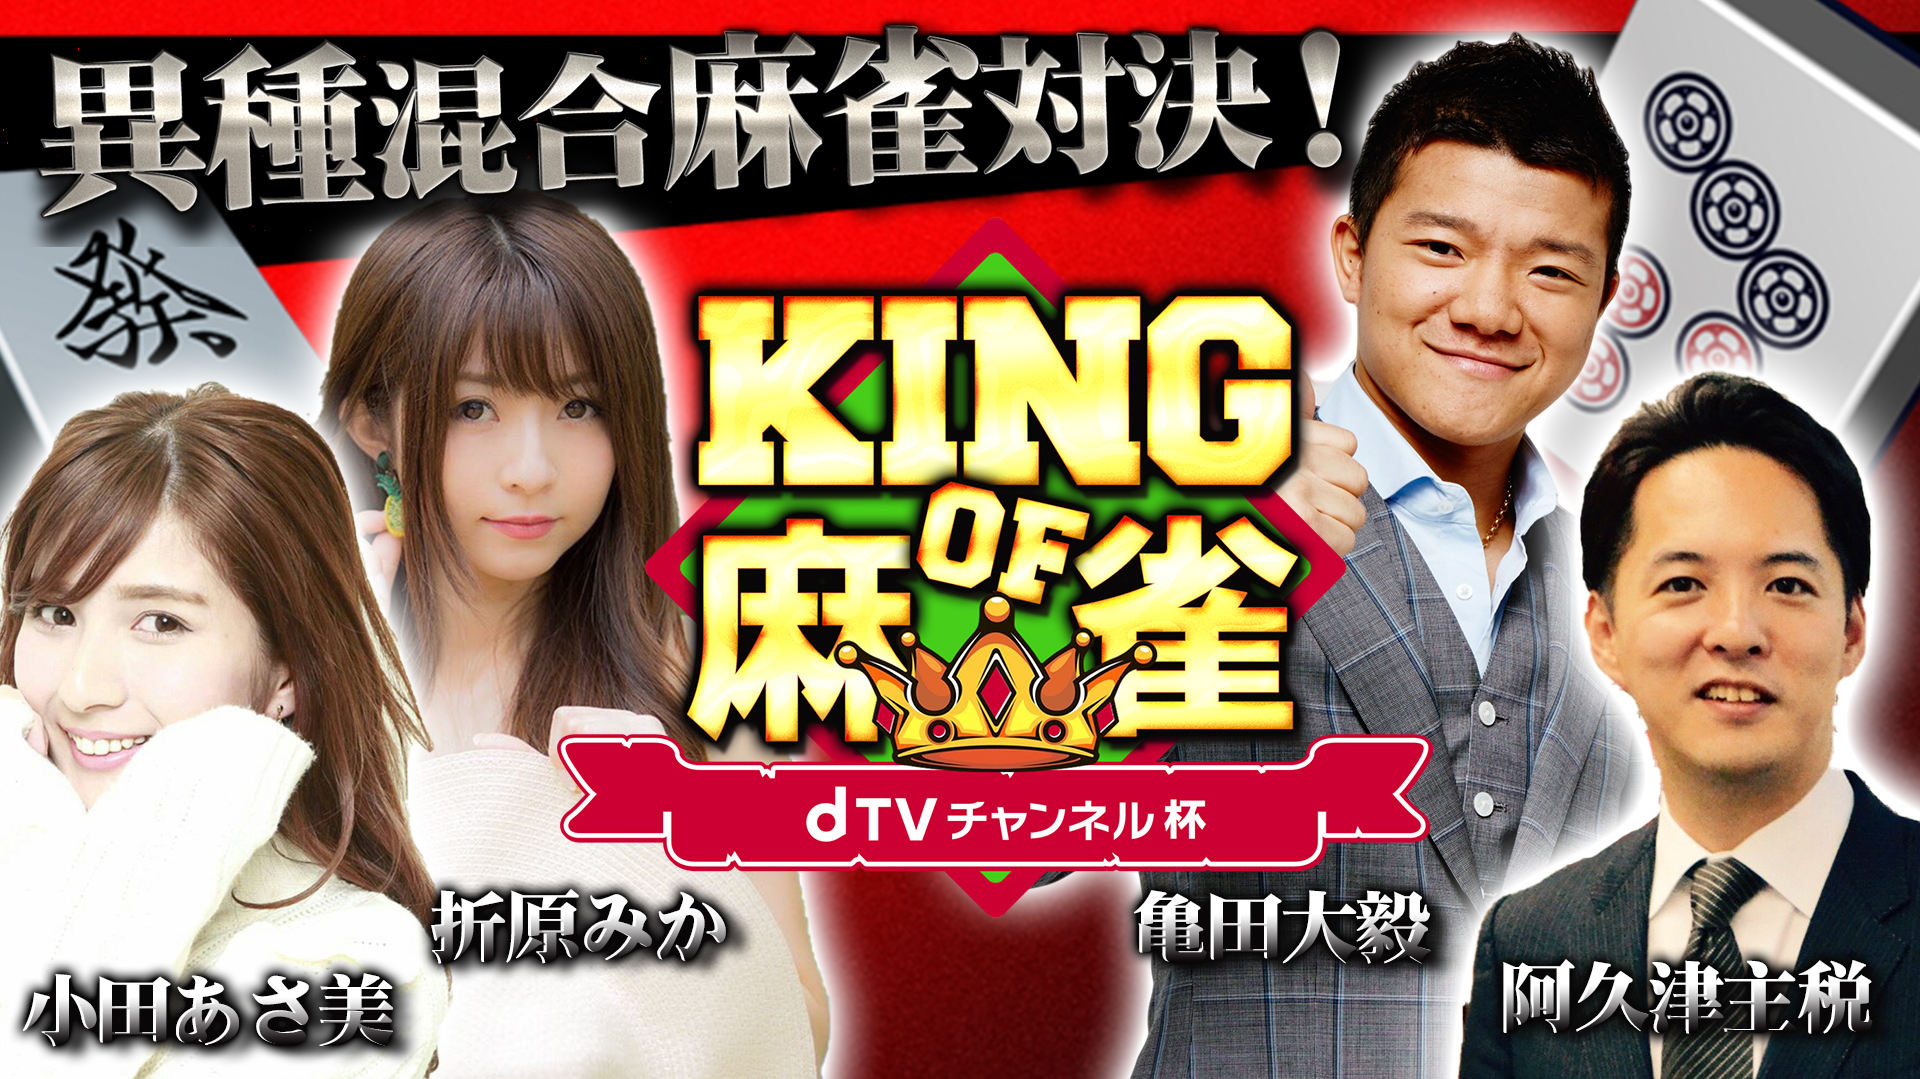 dTVチャンネル杯 KING of 麻雀 第3回